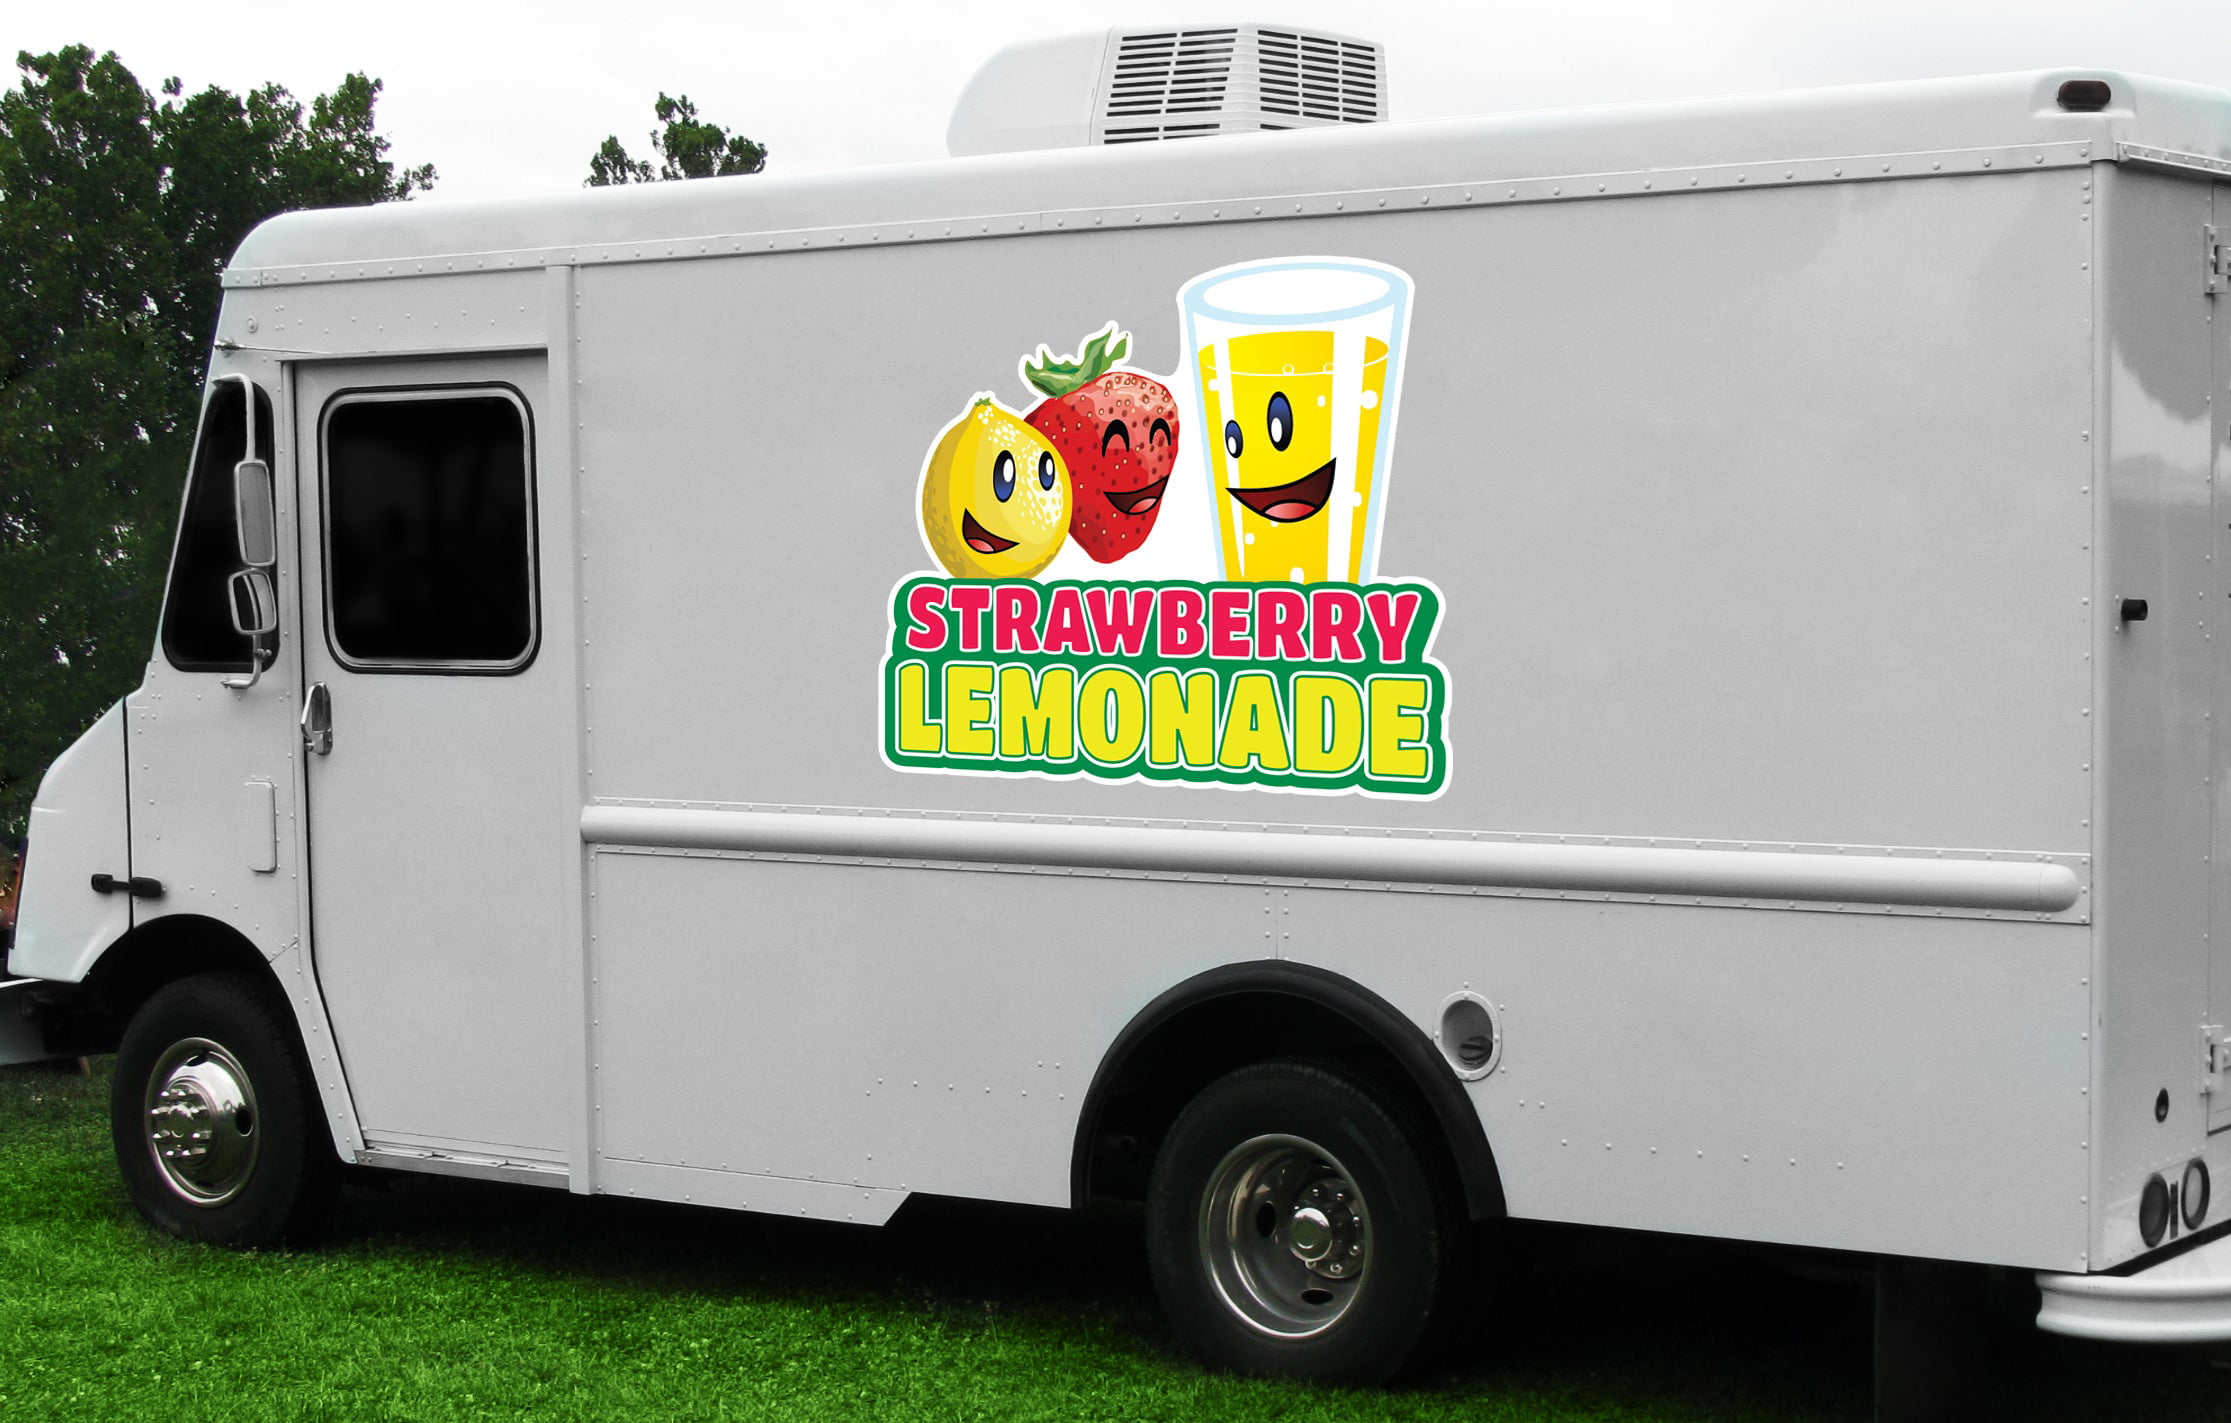 Details about   Strawberry Lemonade DECAL Food Truck Sign Concession Sticker CHOOSE YOUR SIZE 